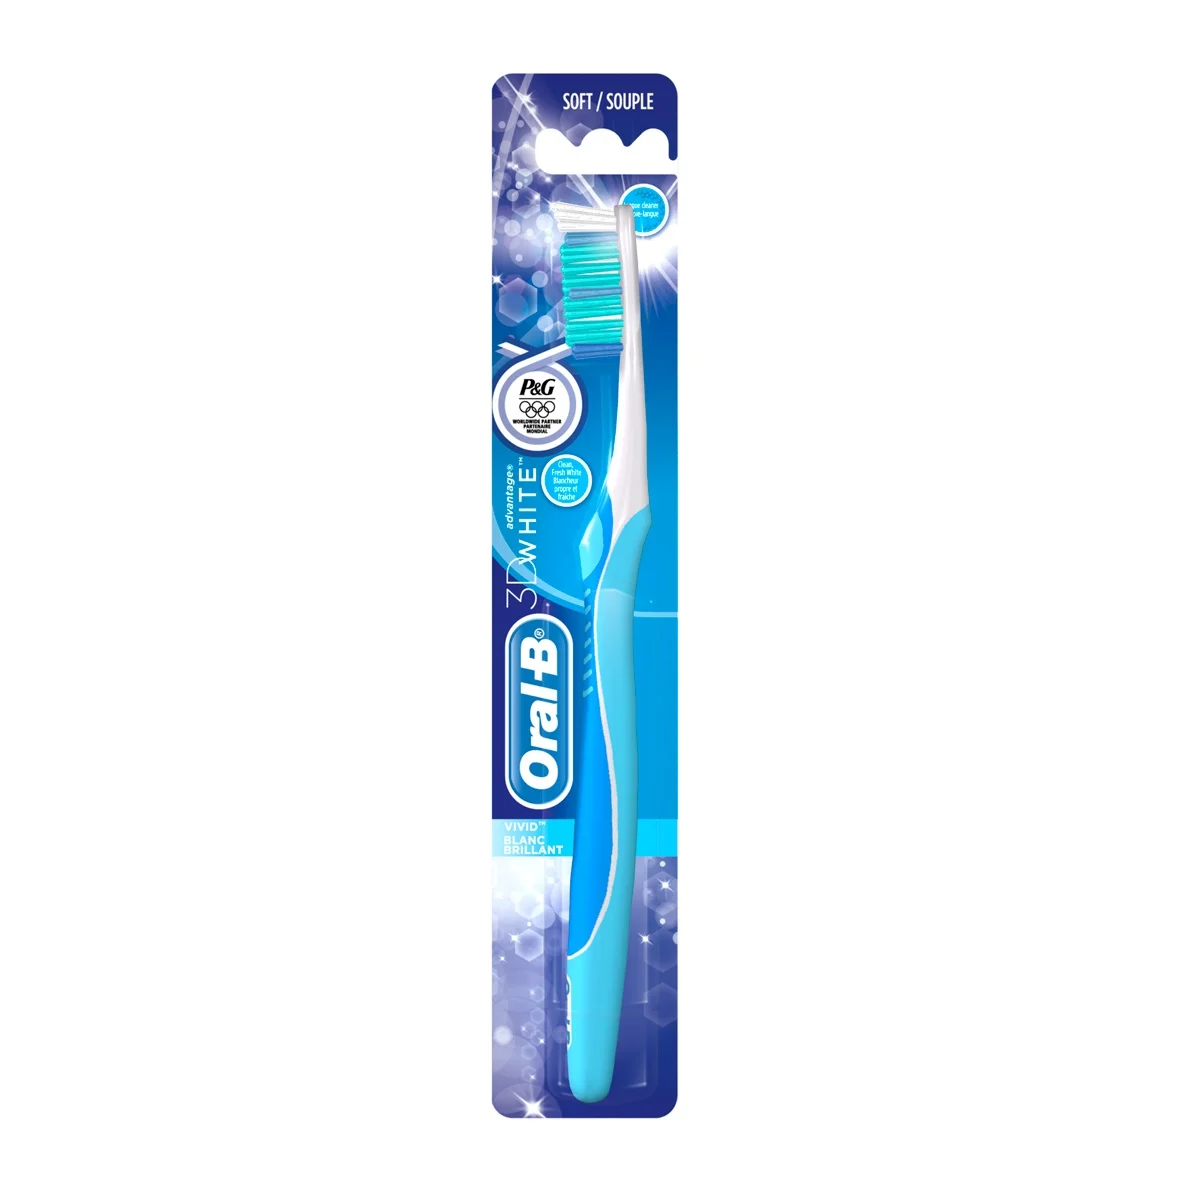 Oral-B 3D White Vivid Manual Toothbrush undefined